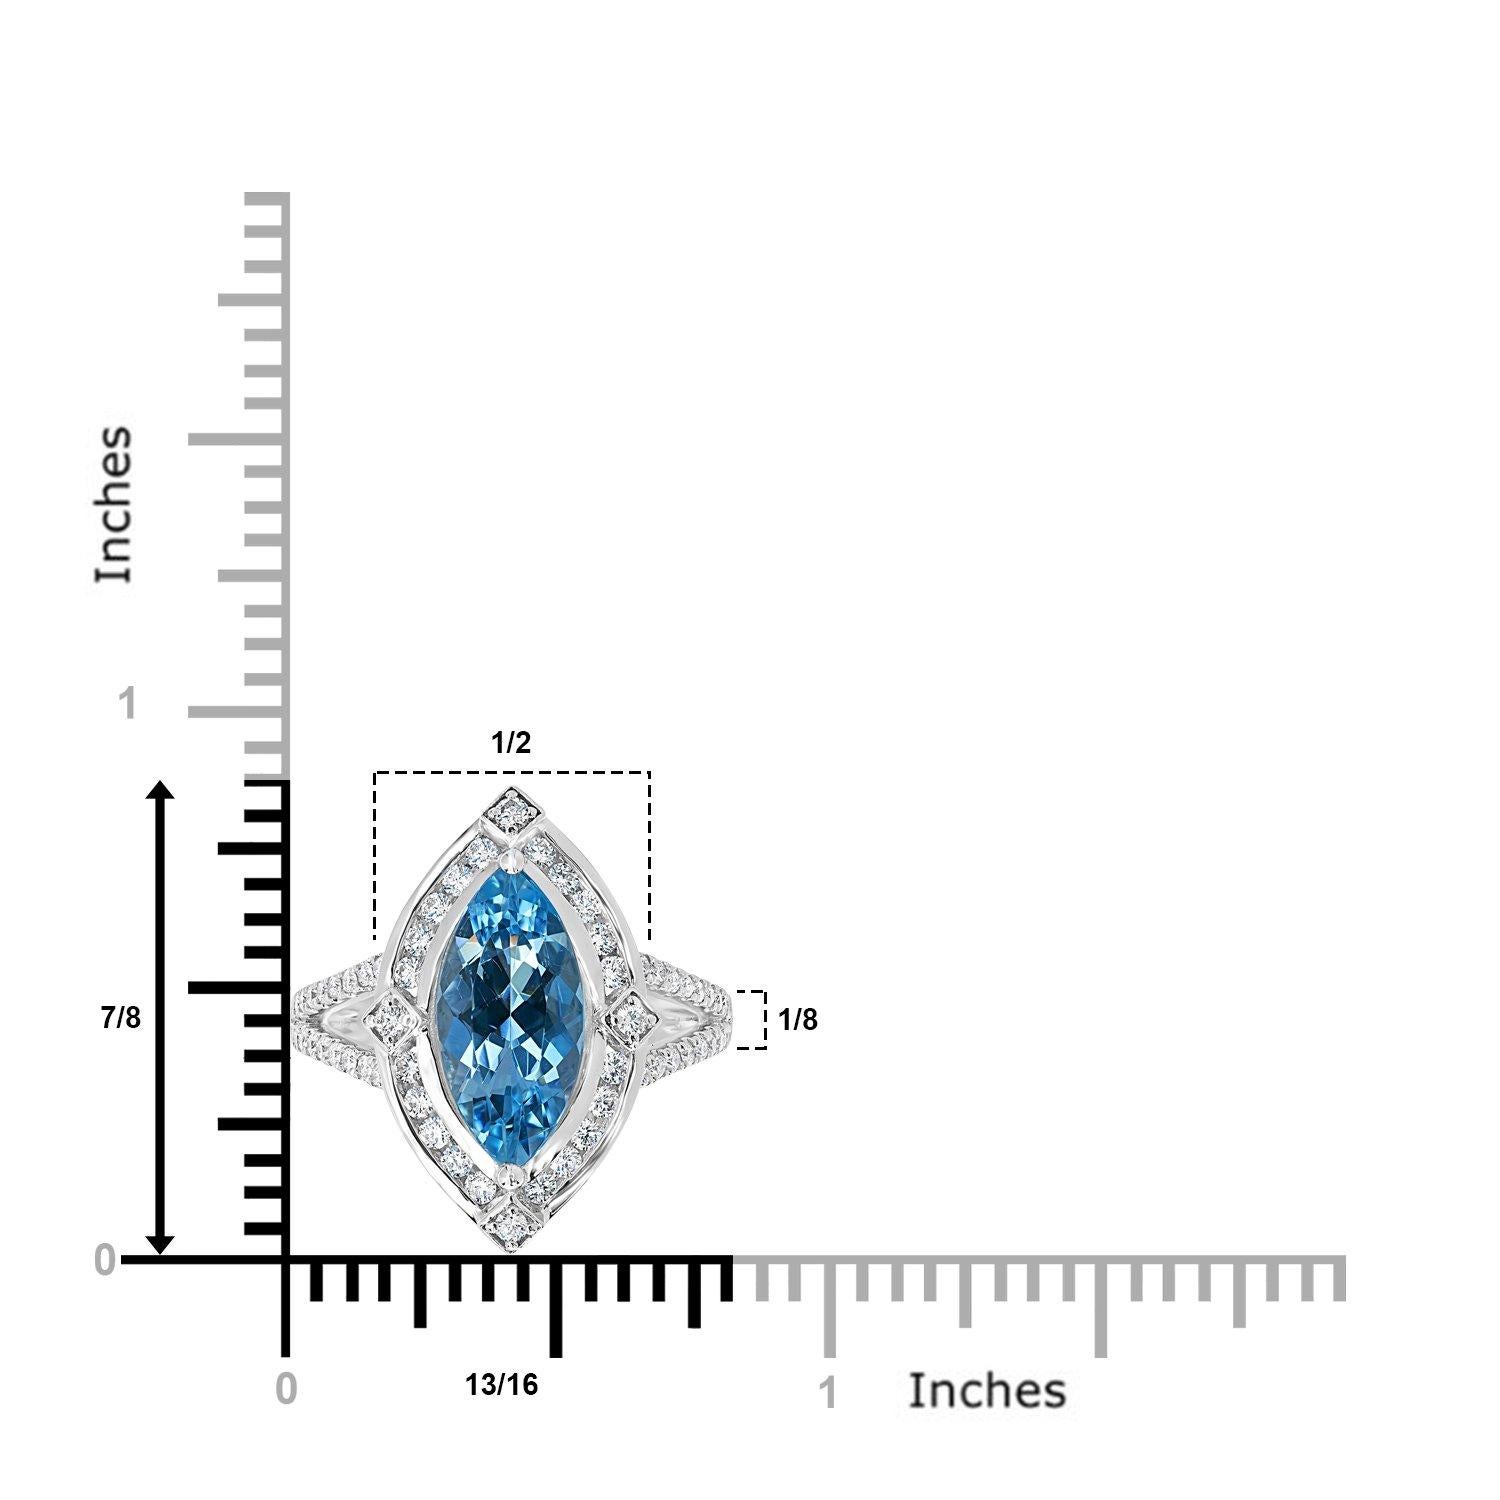 Fashioned from 14k white gold, this trendy ring is set with a gorgeous marquise-cut Aquamarine and round Diamonds to bring out its beauty.

2.23ct Aquamarine Ring
0.52Tct Diamonds set
14K White Gold
